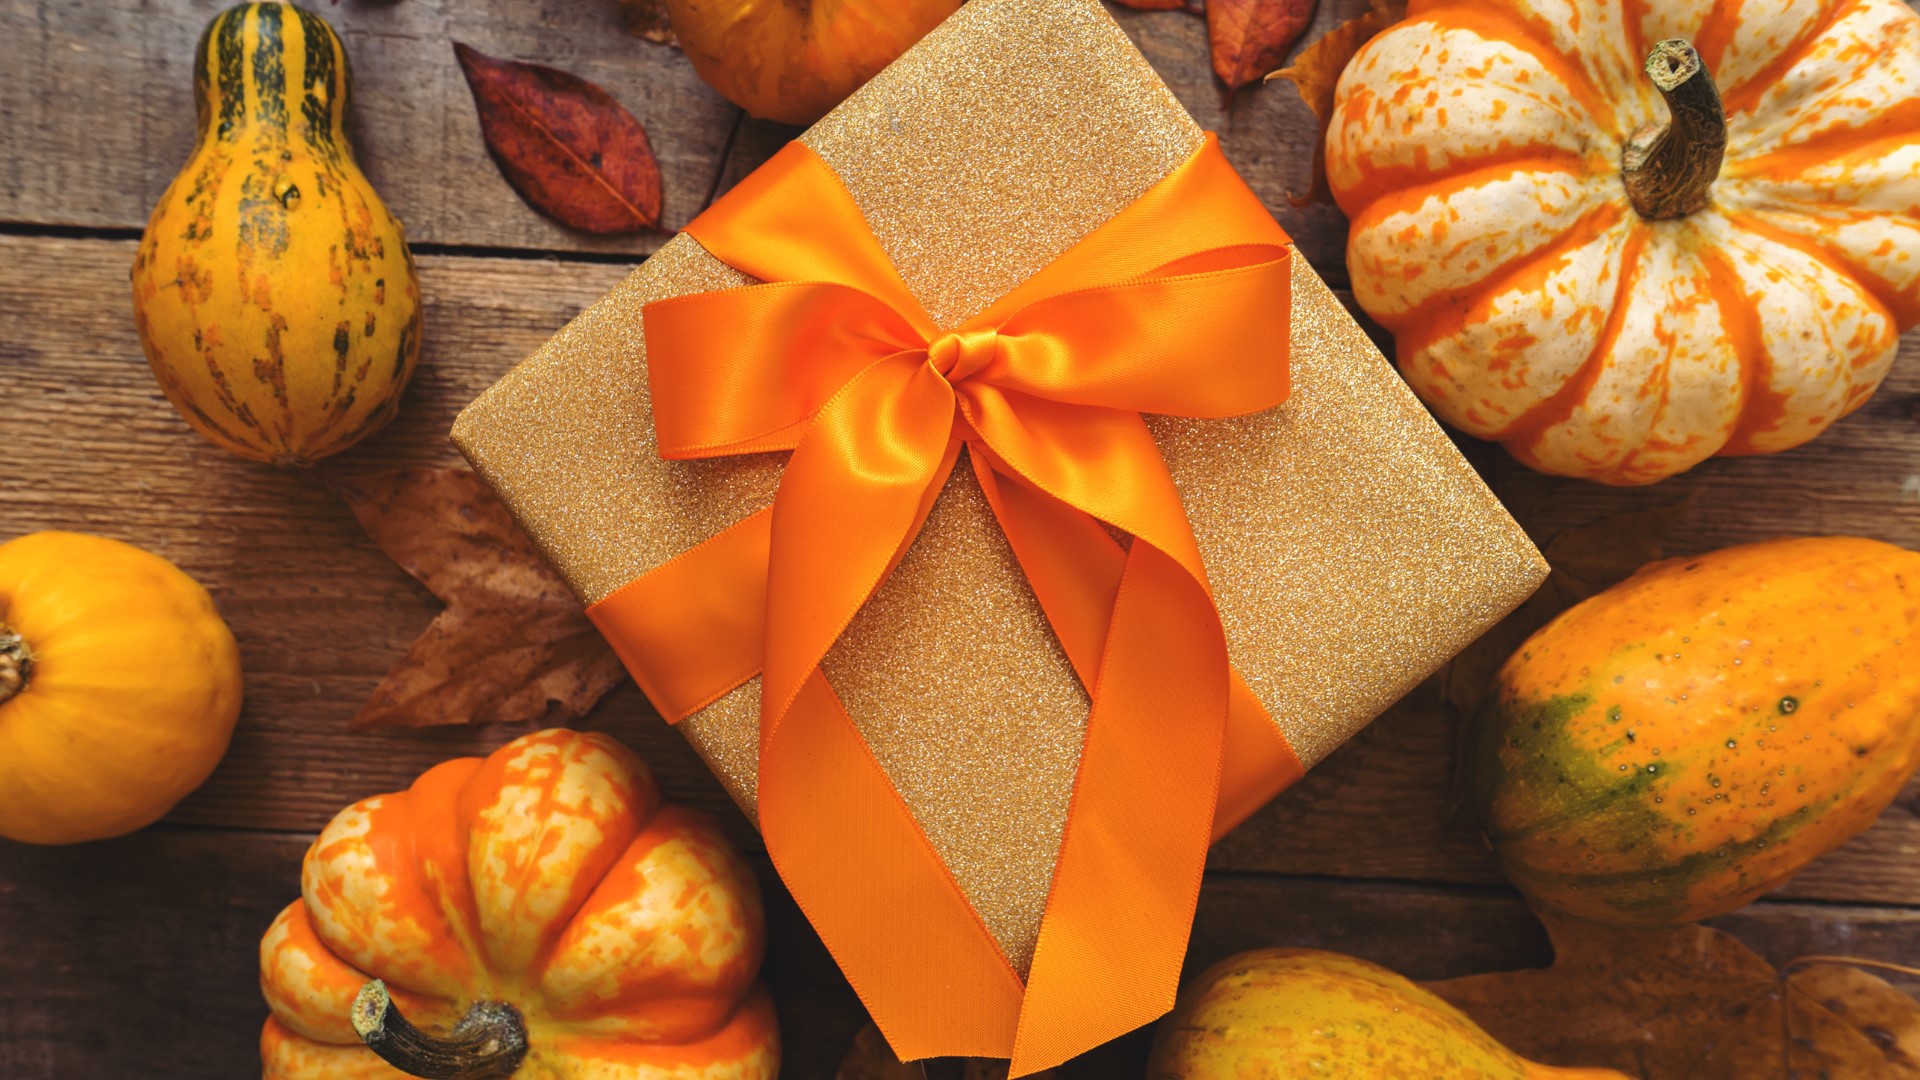 As fall sets in, get into these festive deals at local shops in the Triad.